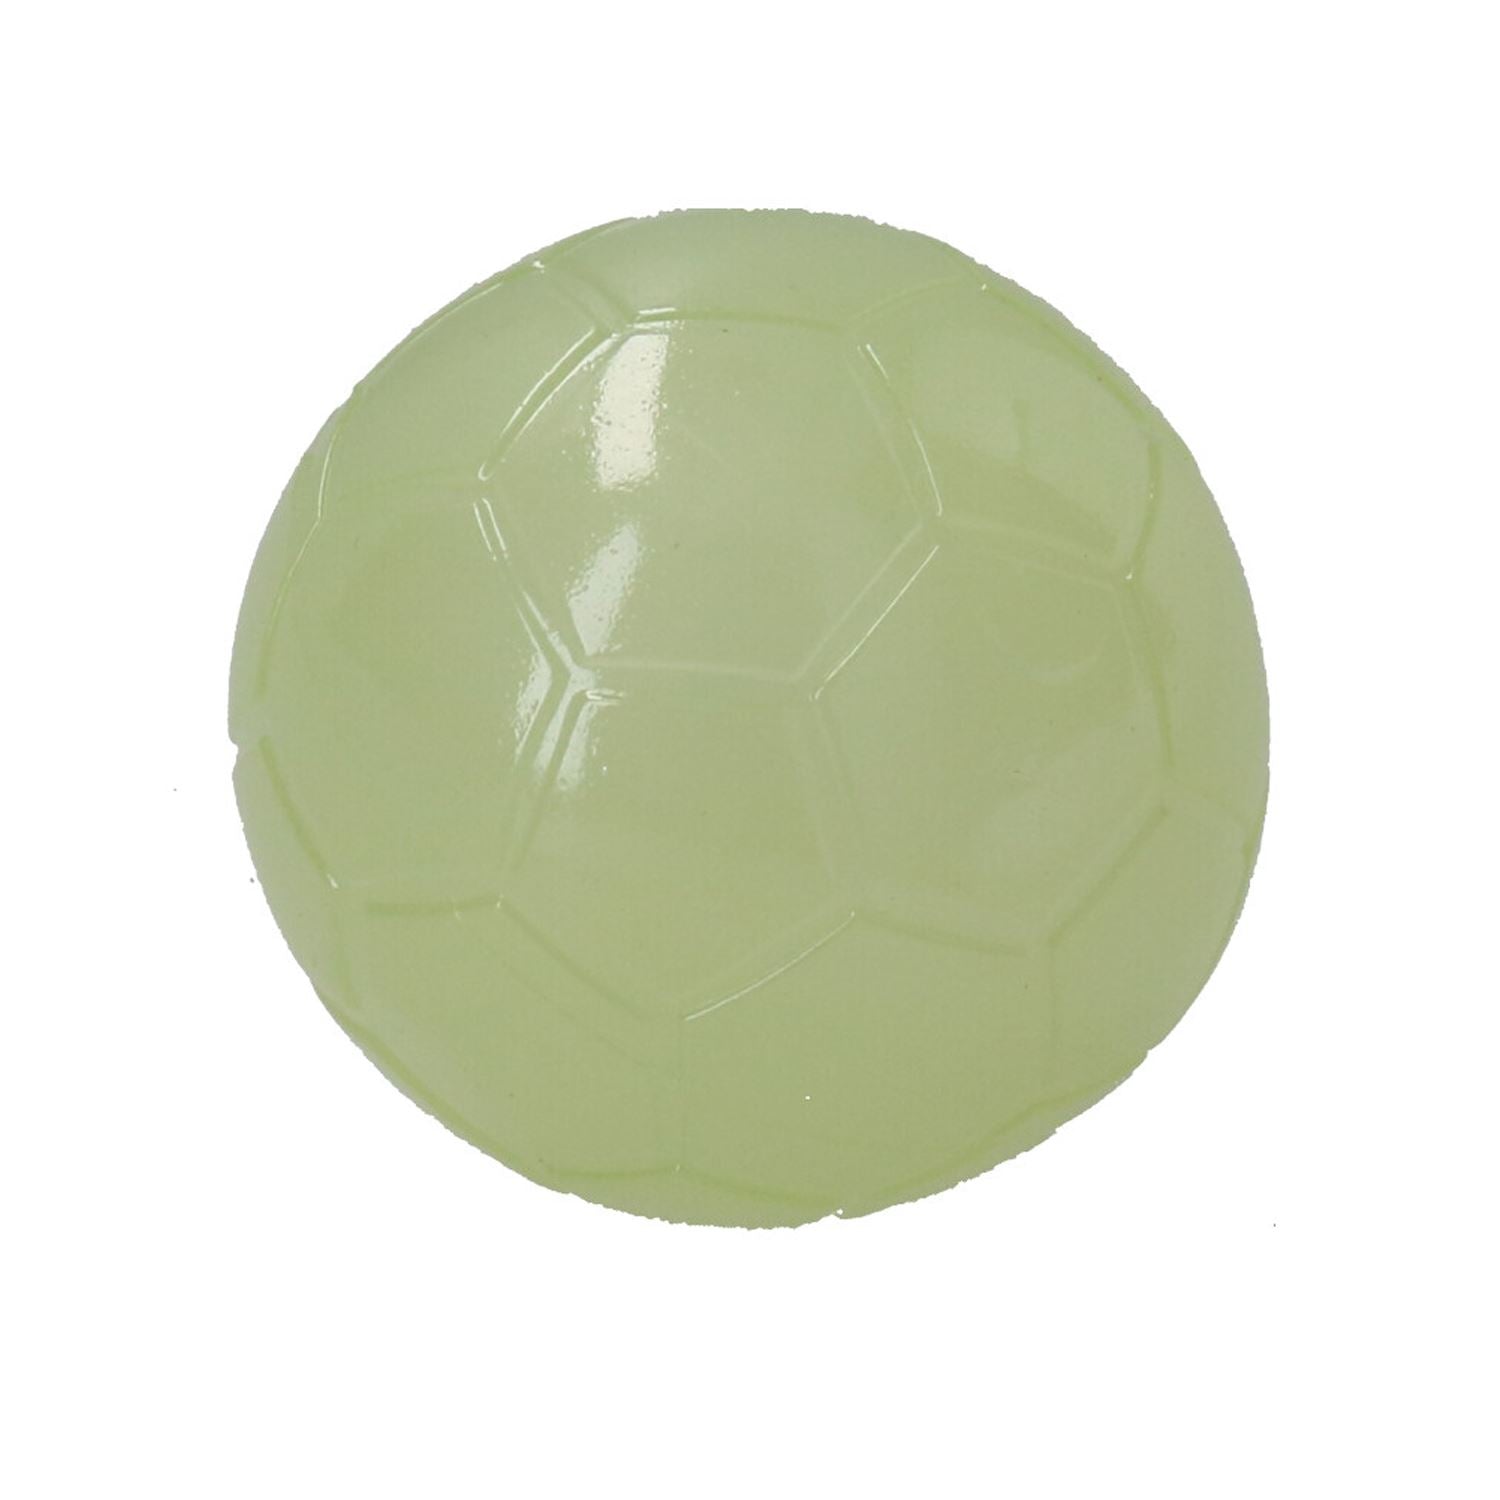 Dog Glow In The Dark Squeaky Bouncy Football For Fetch/ Ball Launchers 6cm